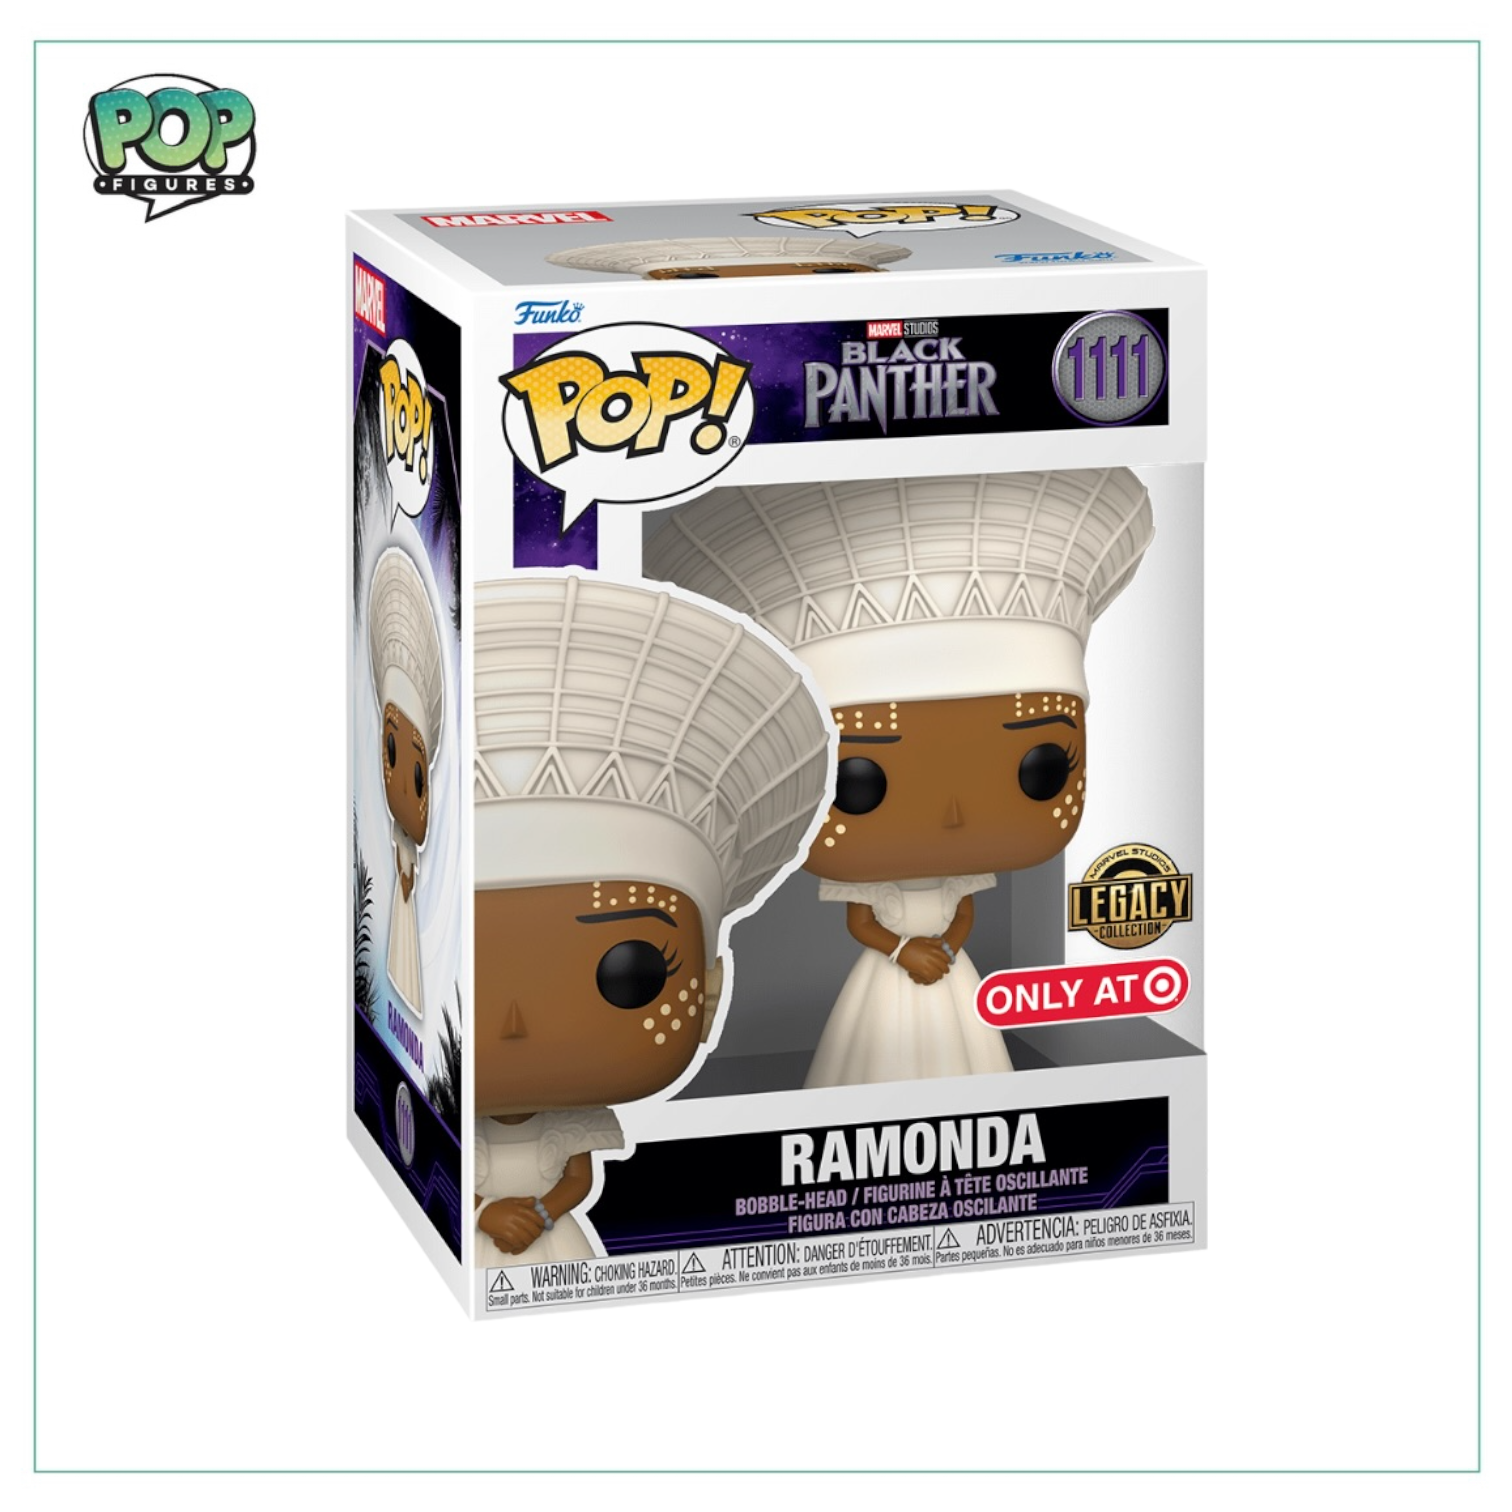 Ramonda #1111 Funko POP! - Marvel - Only at Target Legacy Collection